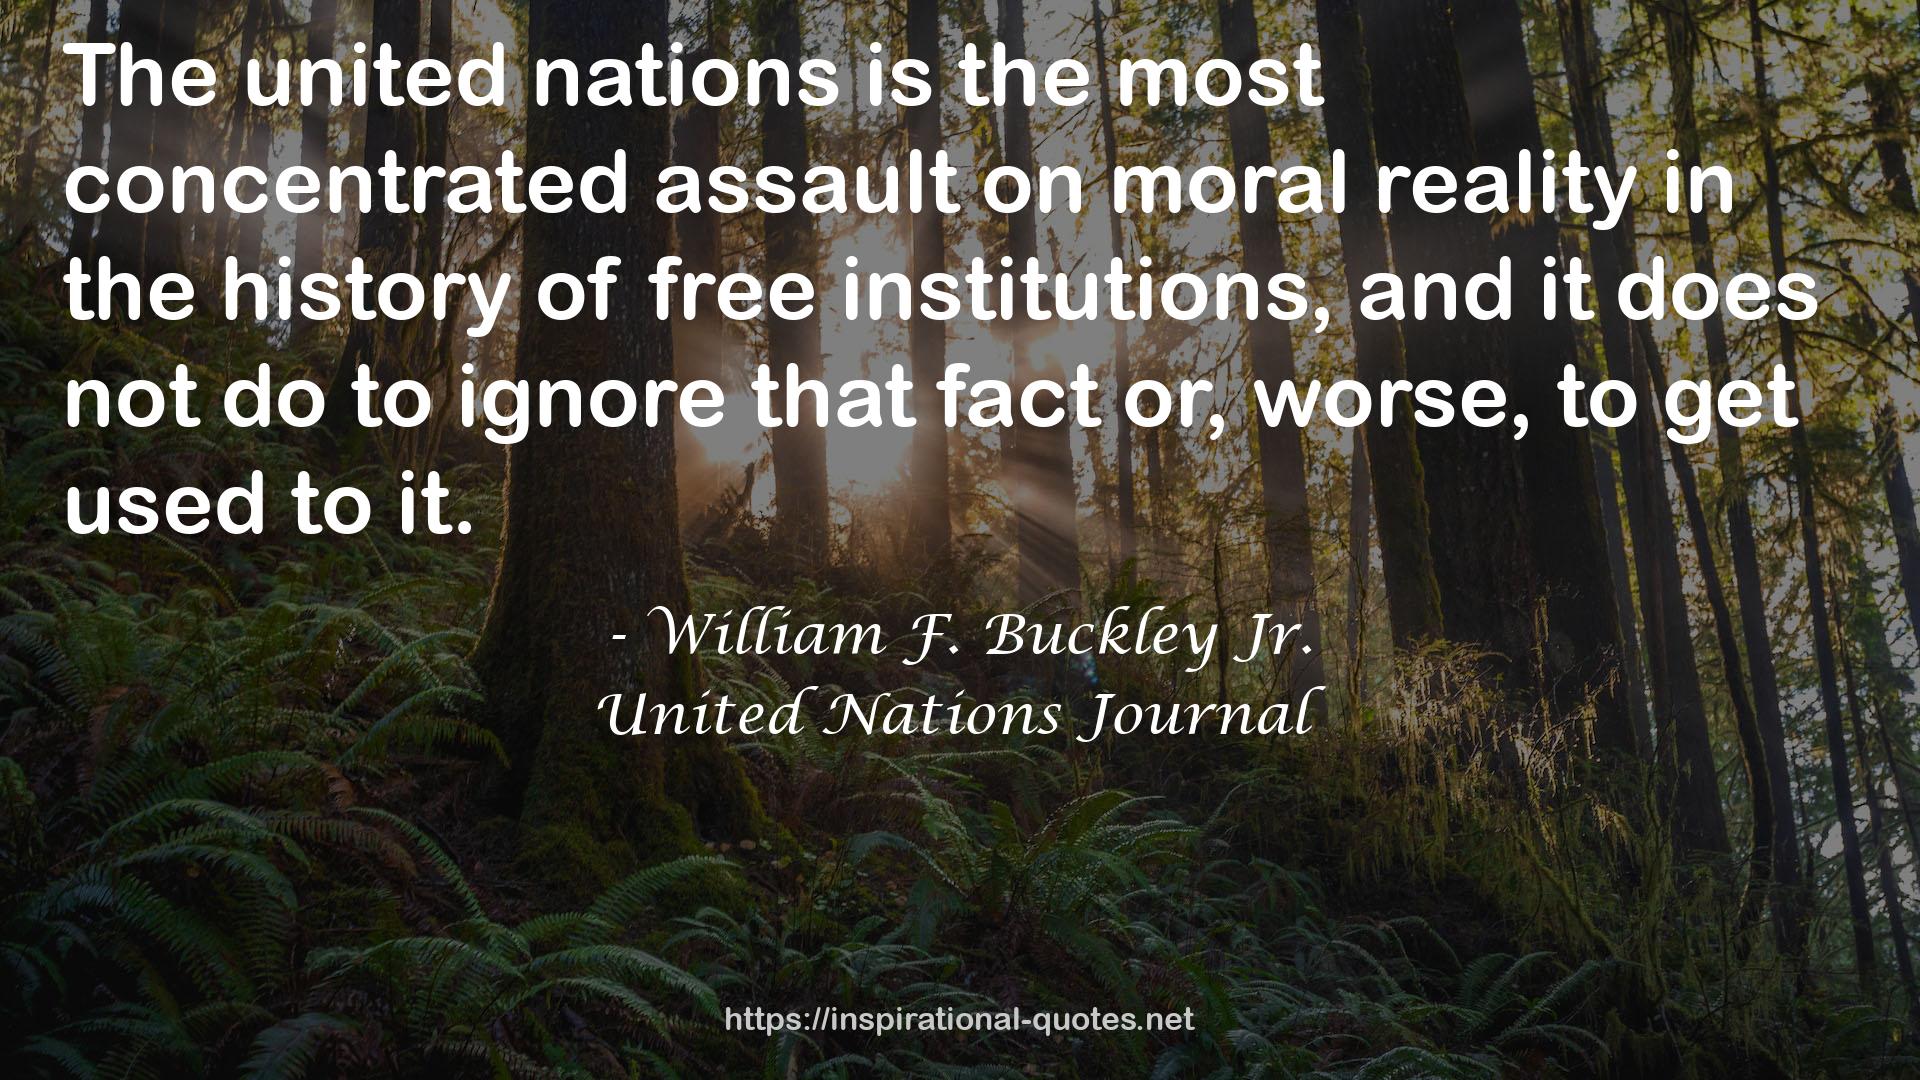 United Nations Journal QUOTES